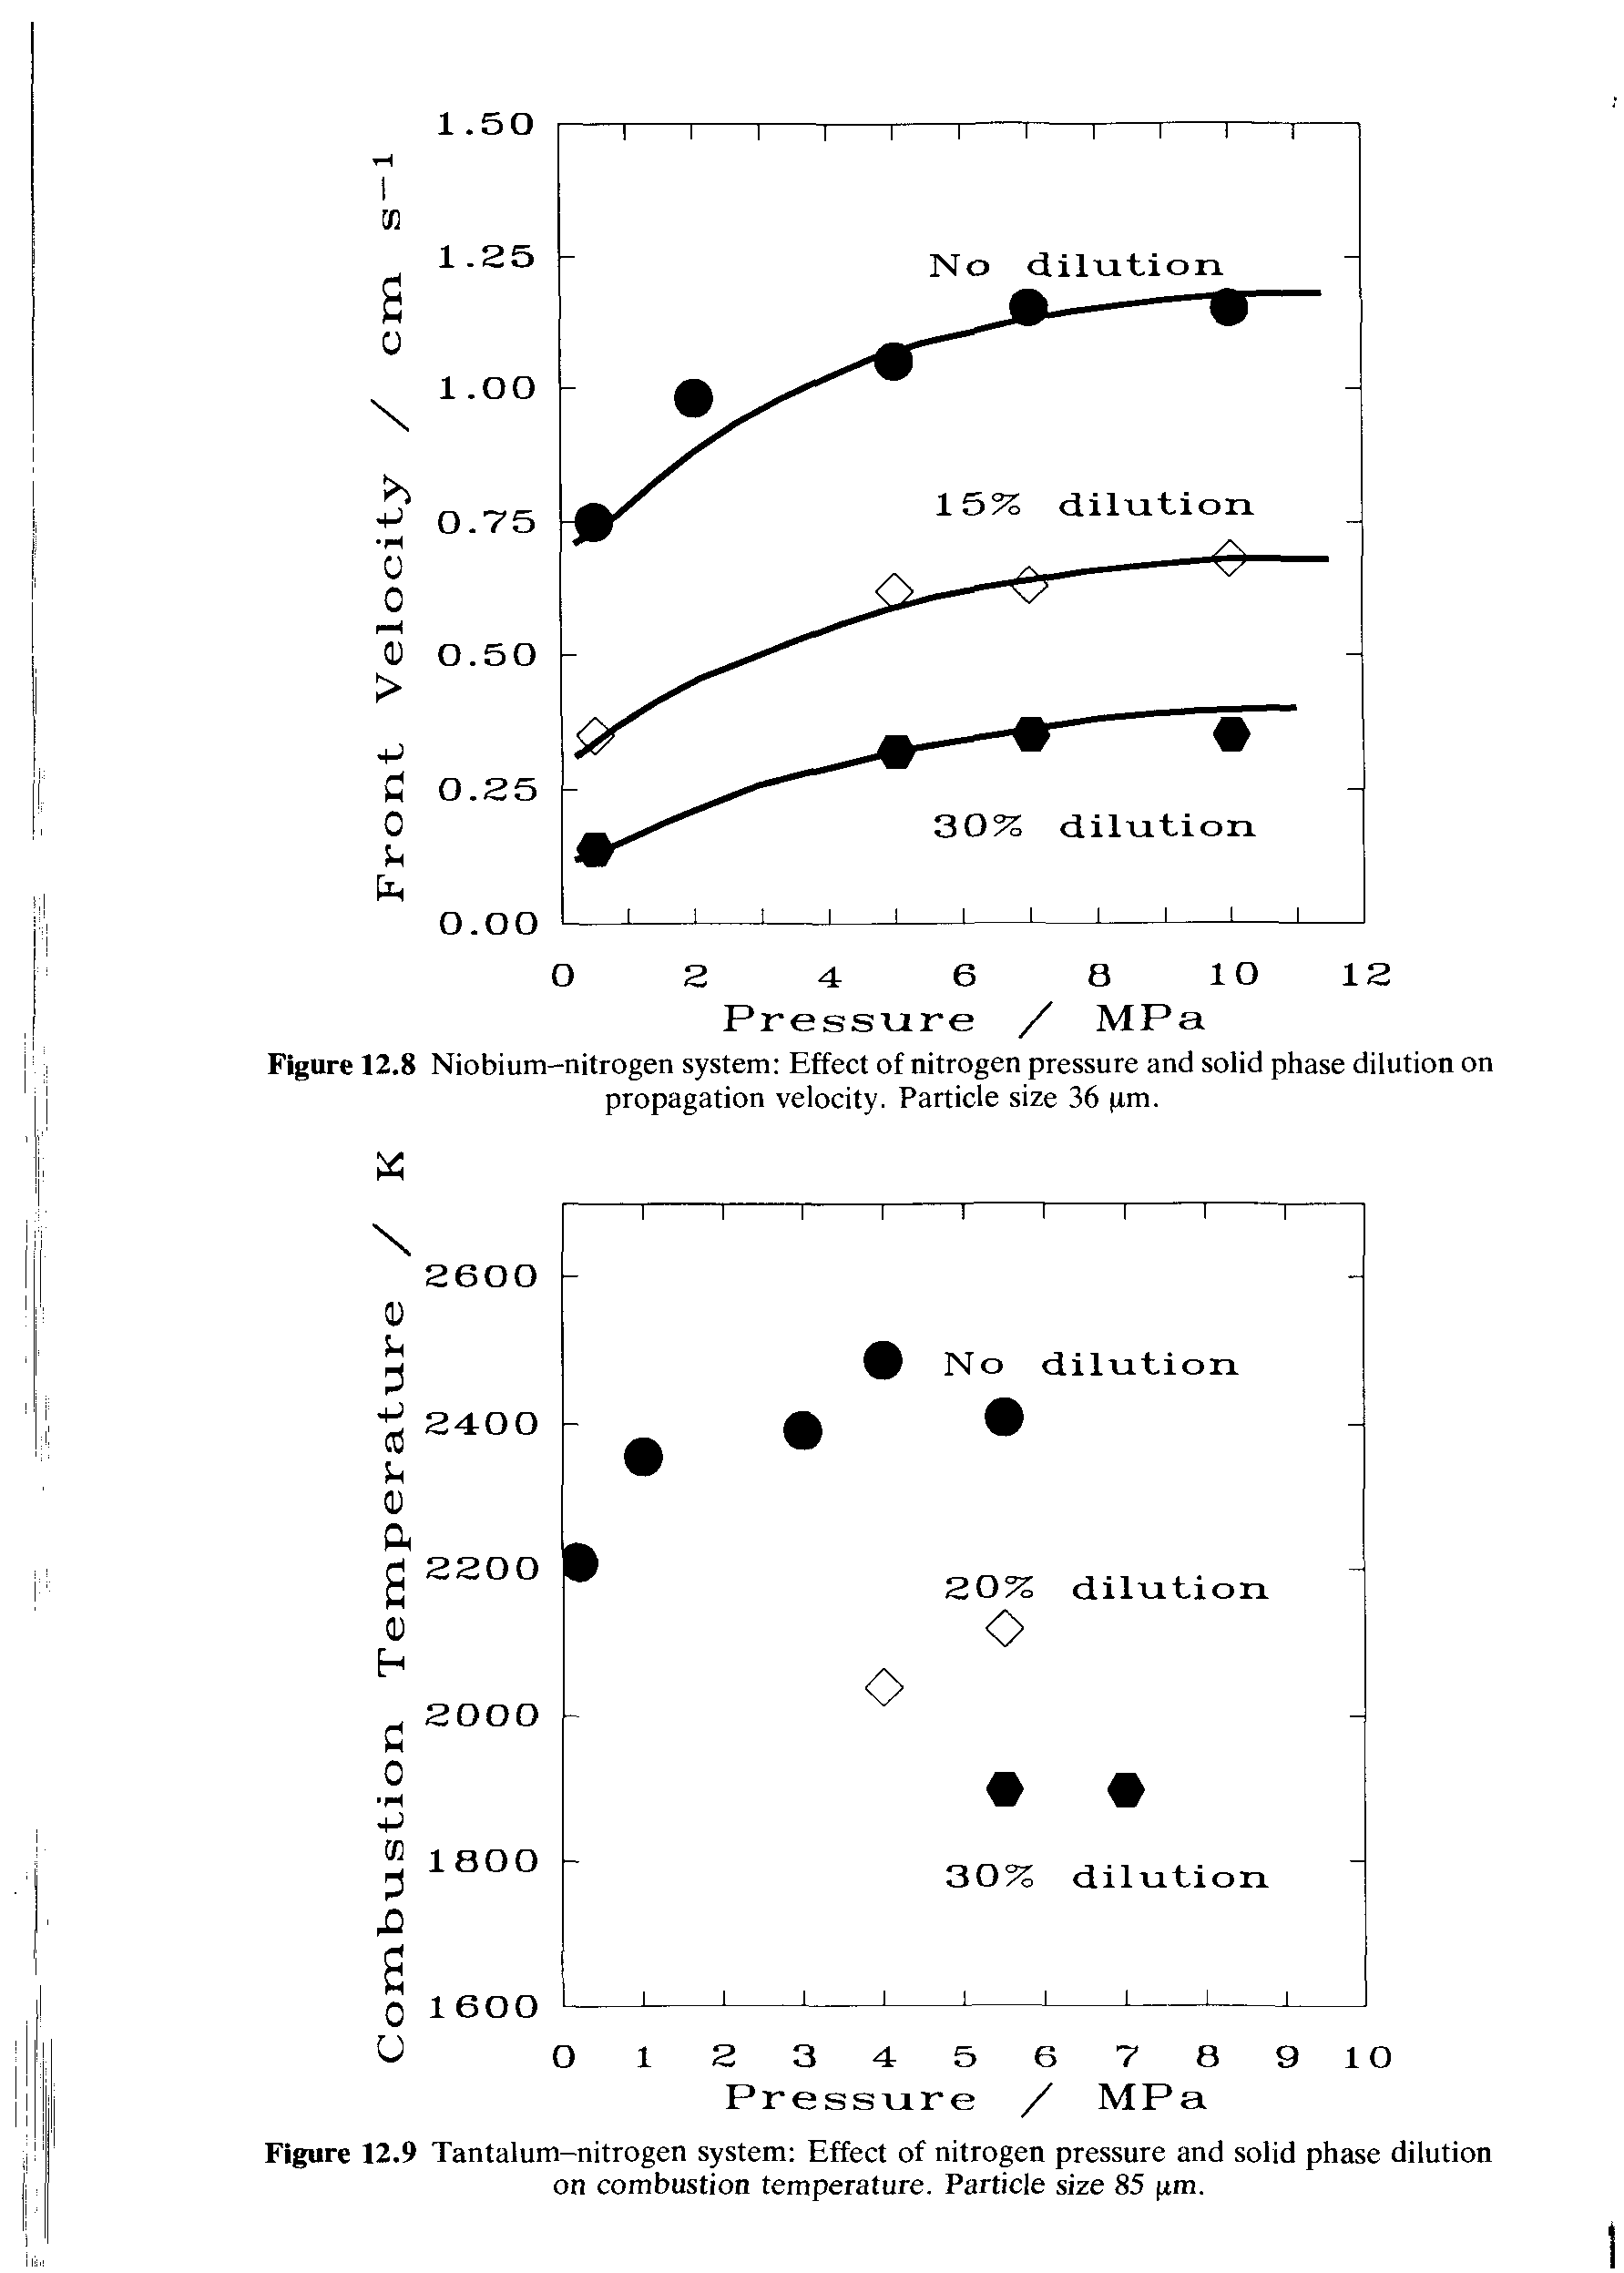 Figure 12.8 Niobium-nitrogen system Effect of nitrogen pressure and solid phase dilution on propagation velocity. Particle size 36 pm.